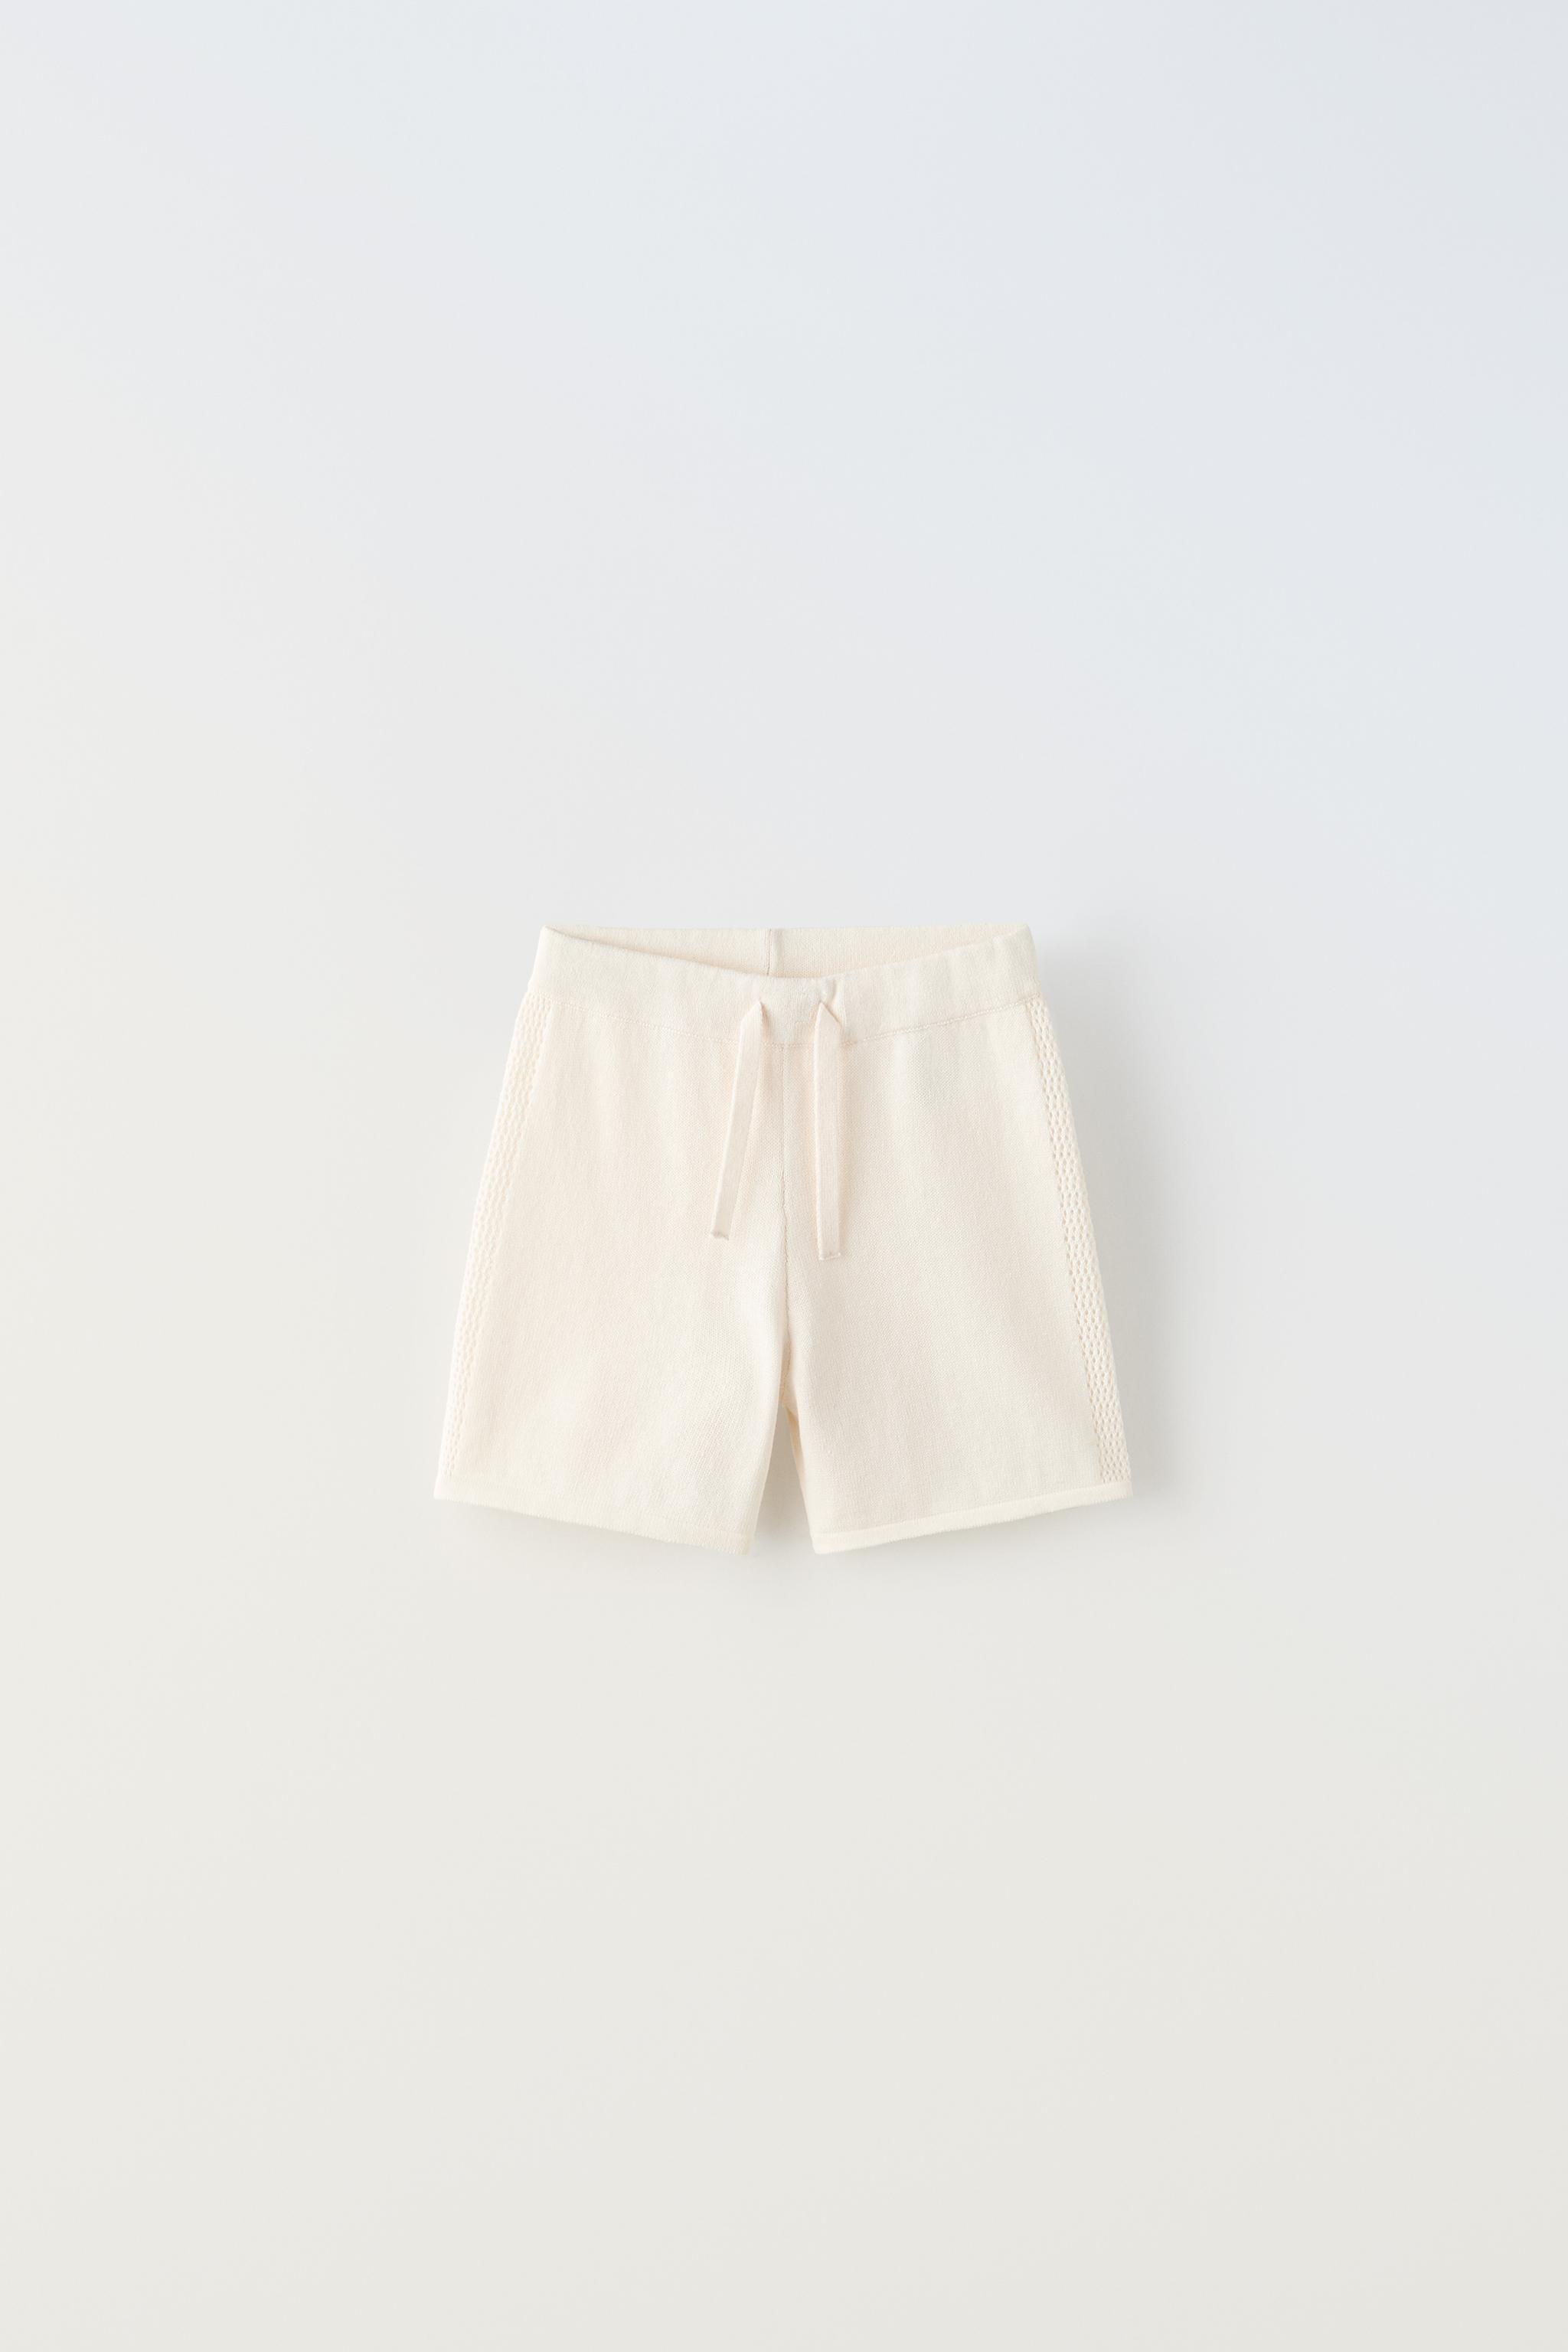 Embroidered Knit Shorts